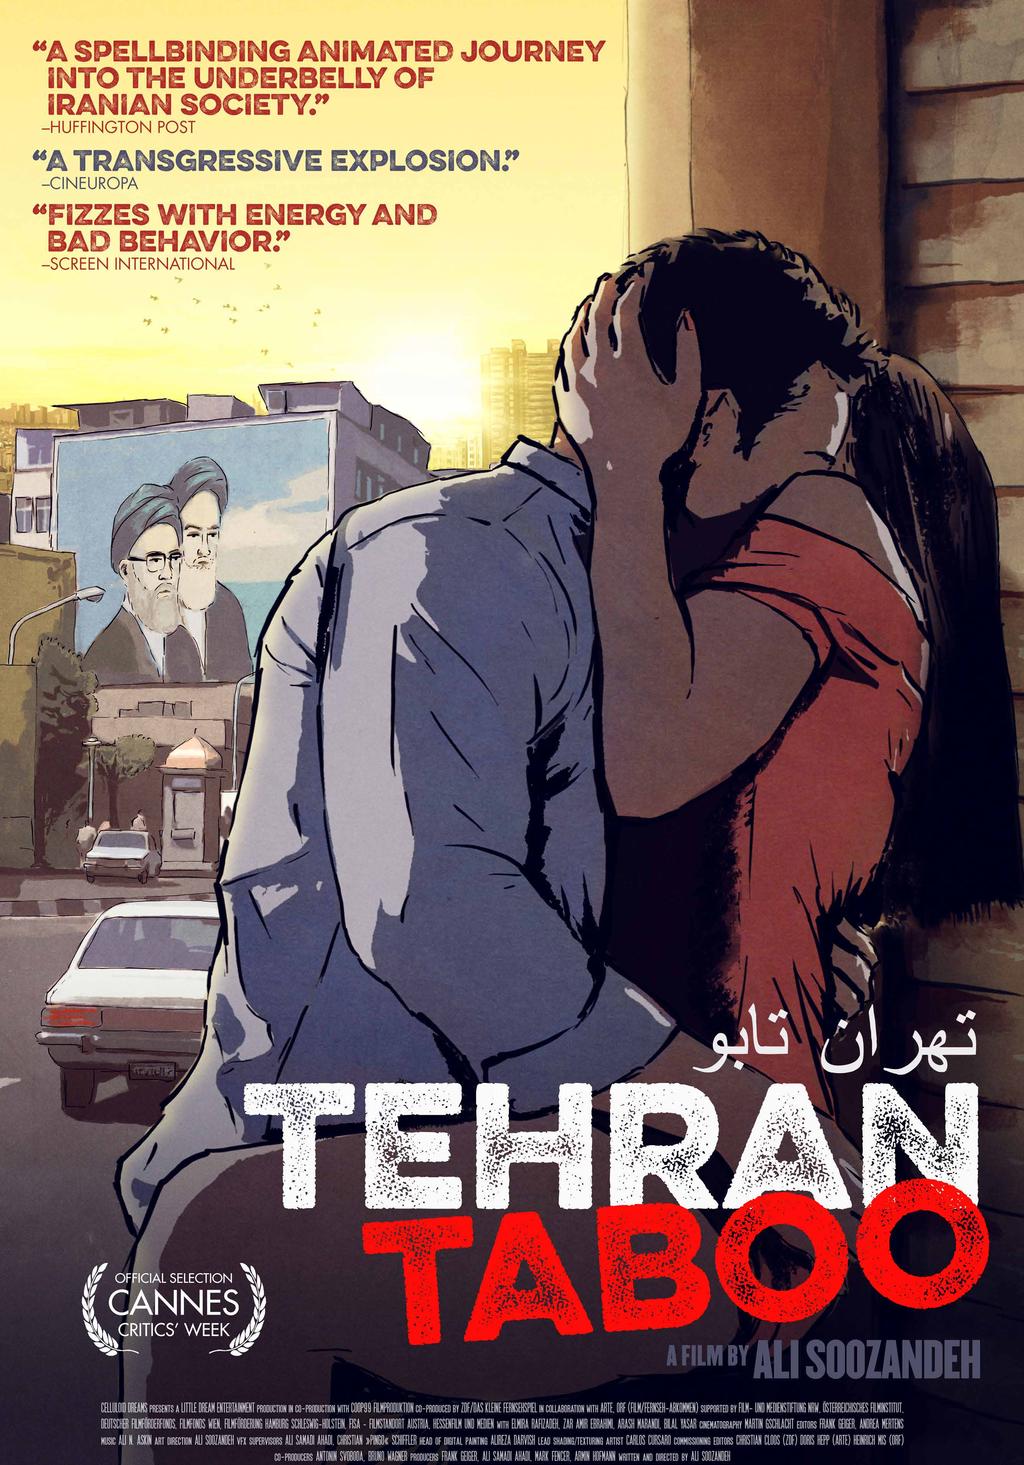 TEHRAN TABOO Digital screening starts on 3rd Jun at 17:00 Available for 7 days Ali Soozandeh 2017 Language: Farsi; Hebrew subtitles 96 minutes T he lives of three strong-willed women and a young